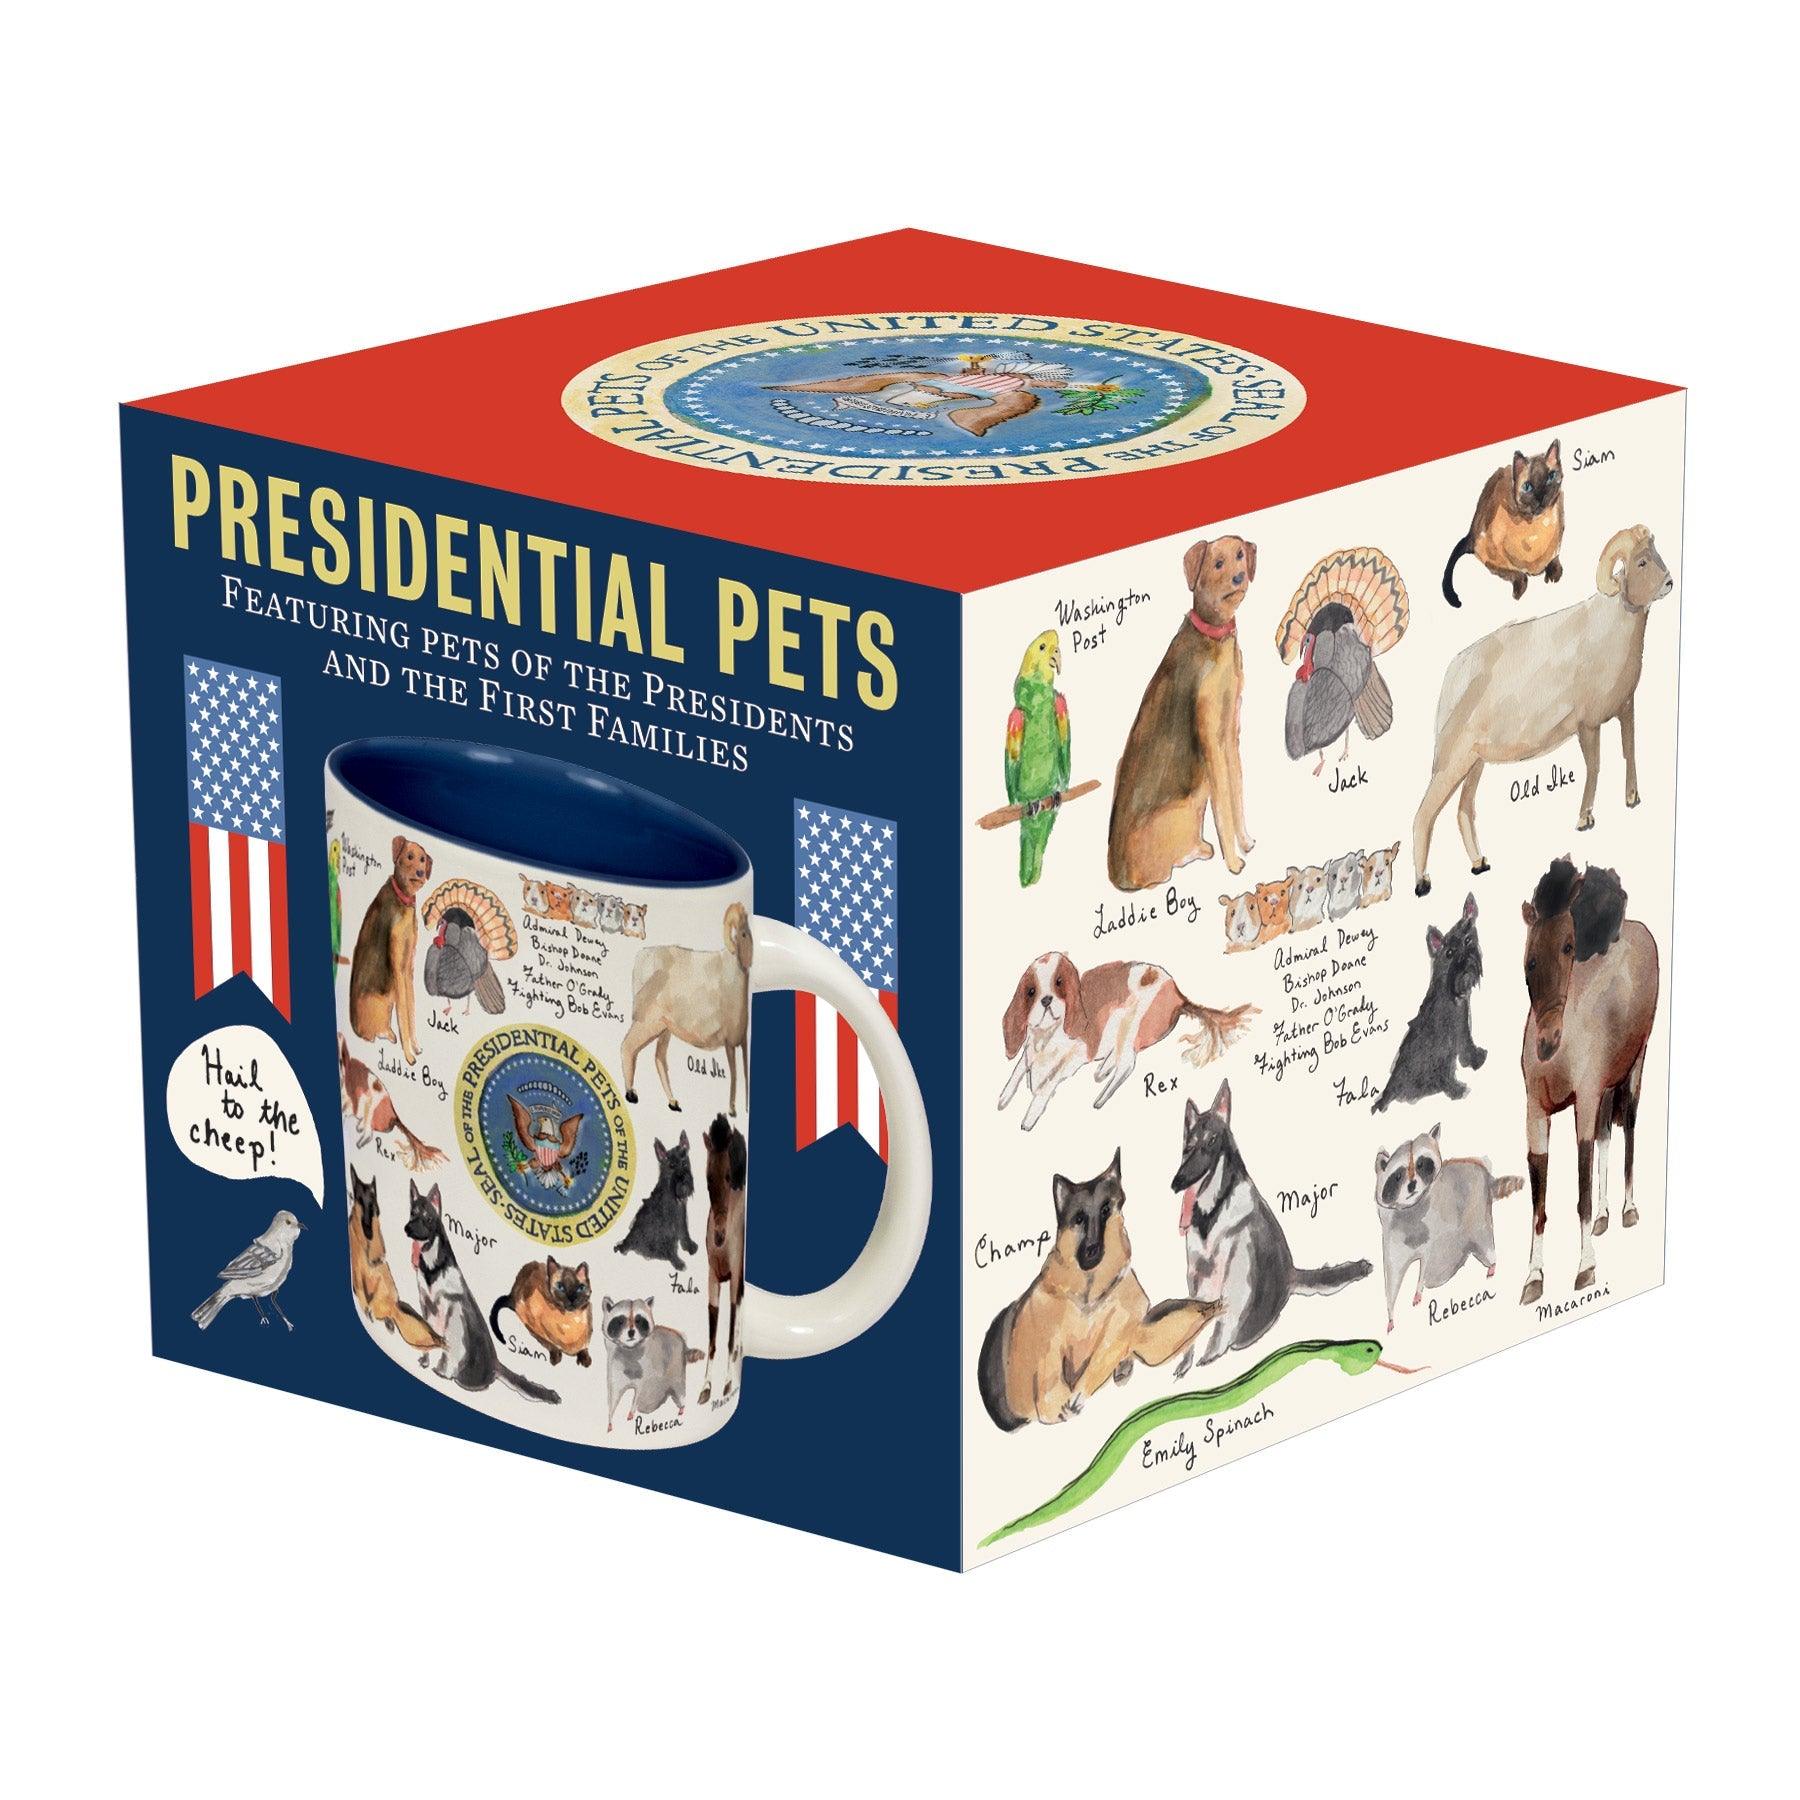 Product photo of Presidential Pets Mug, a novelty gift manufactured by The Unemployed Philosophers Guild.